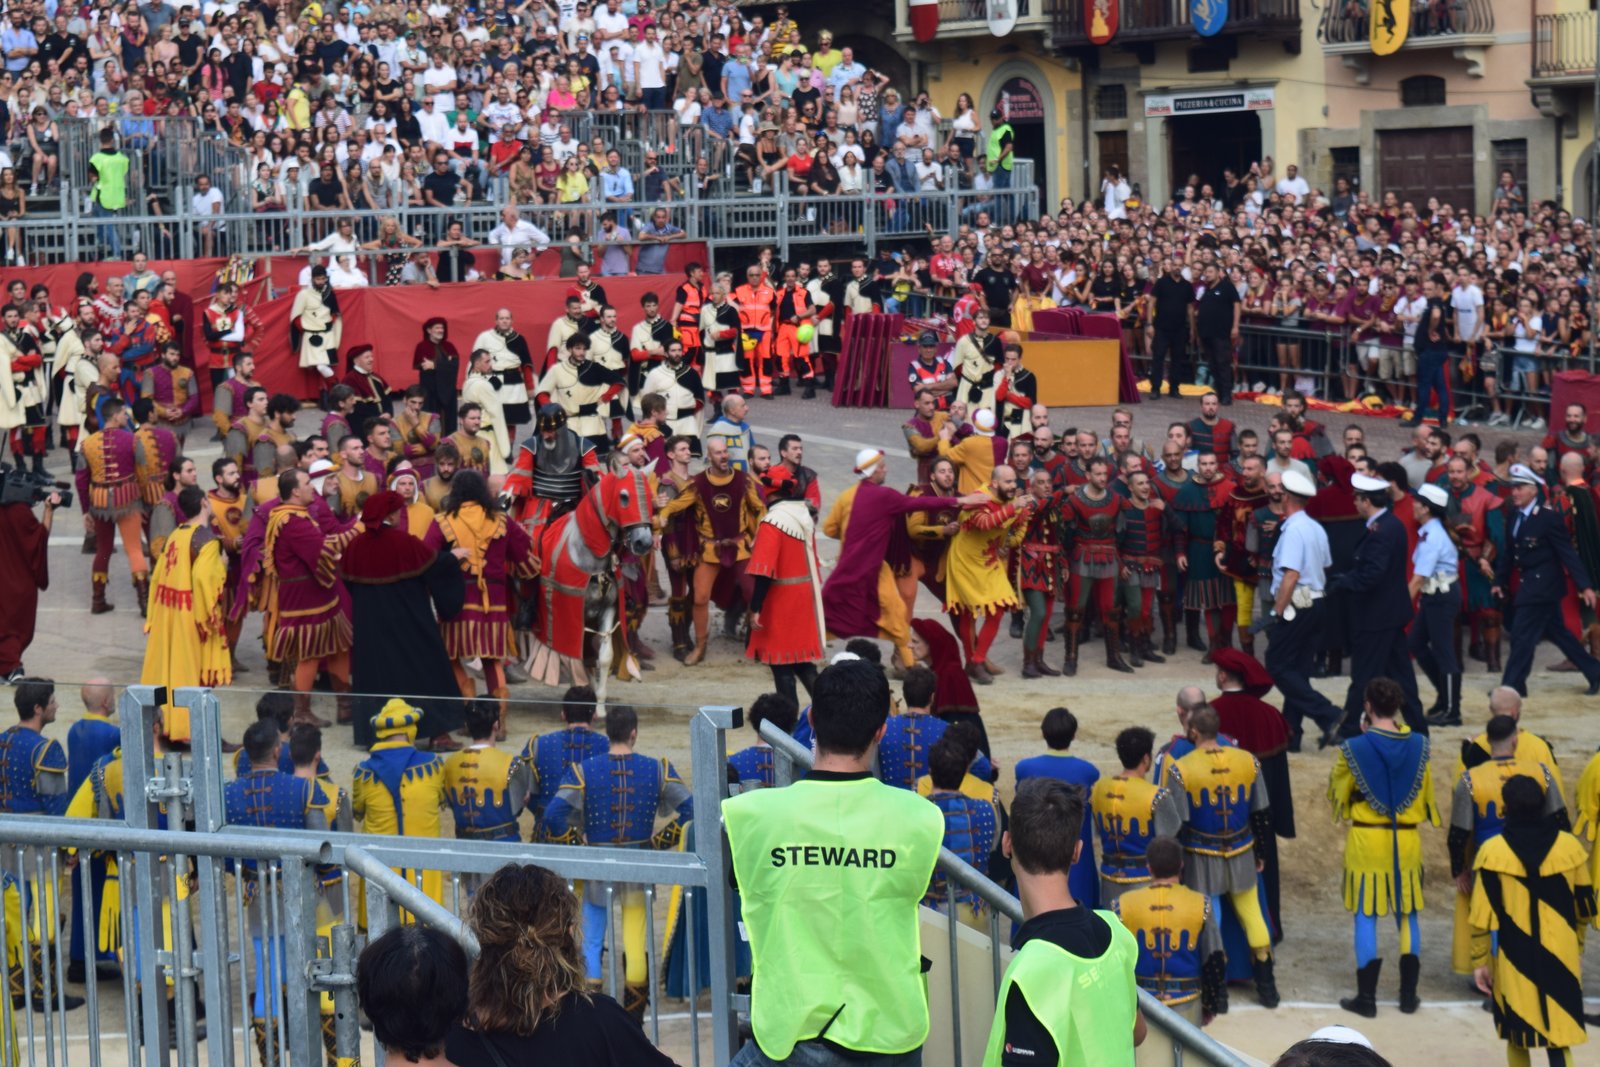 Giostra del Saracino or Joust of the Saracen in Arezzo, Italy, September 1, 2019. Medieval event, https://ouritalianjourney.com/attending-the-joust-of-the-saracen-in-arezzo